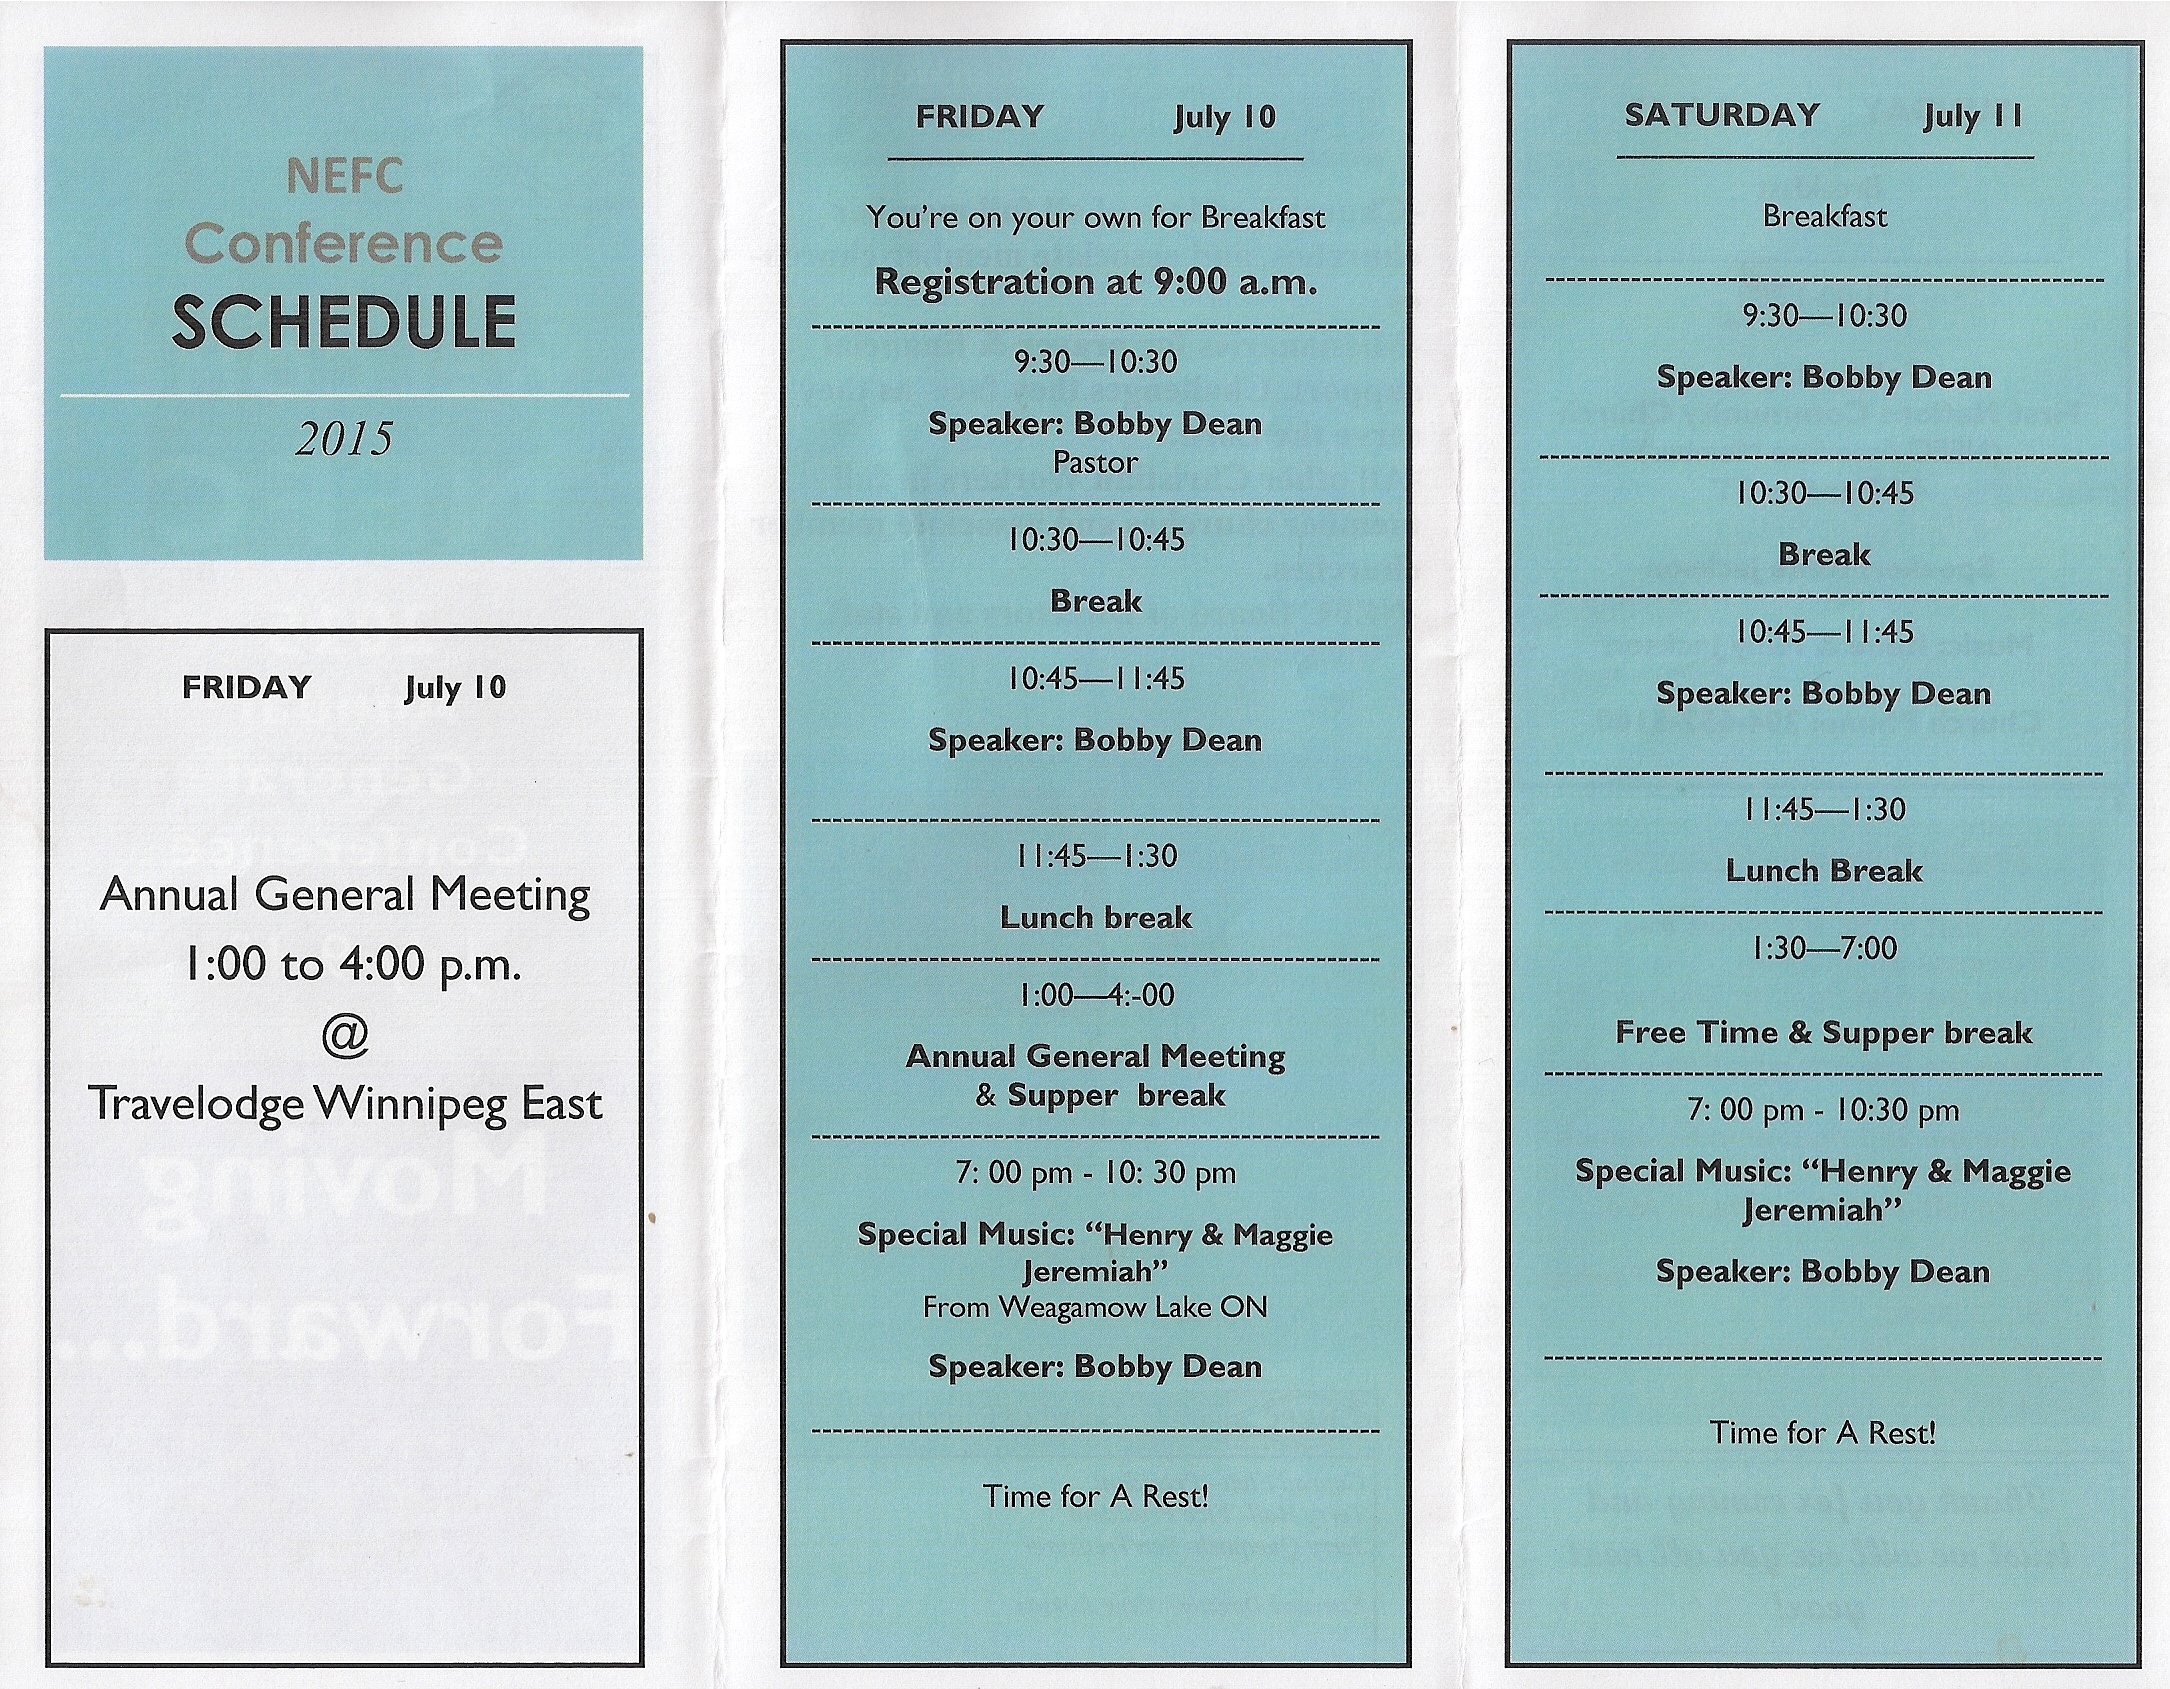 nefc conference schedule 2015